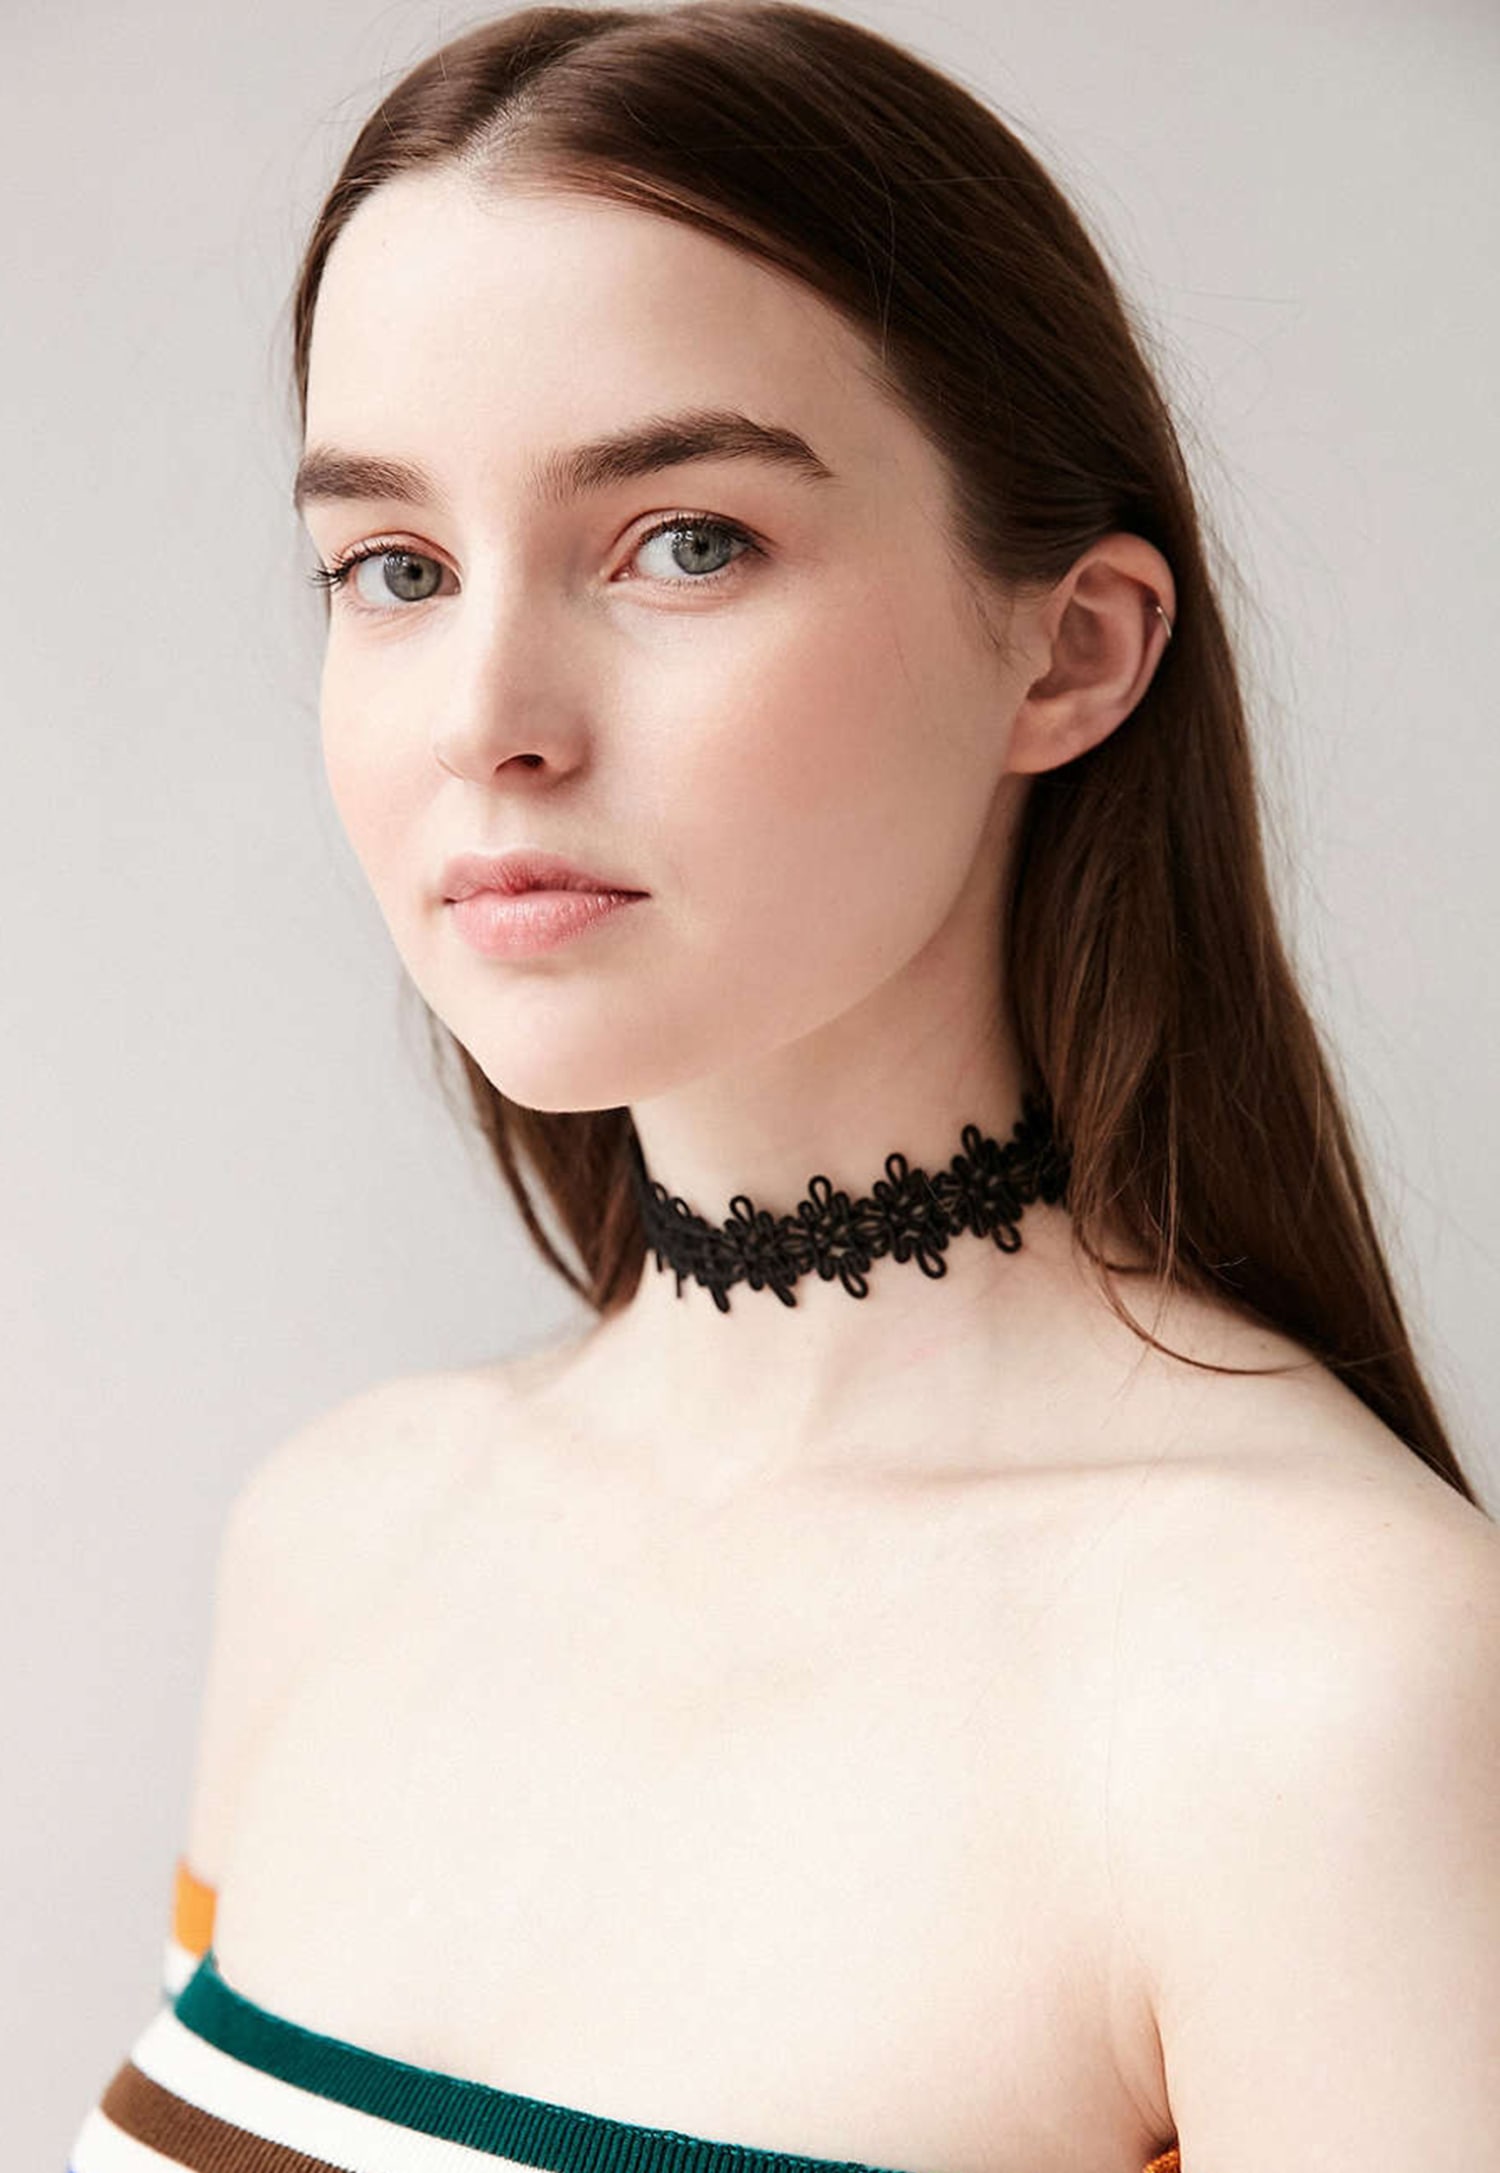 Choker necklaces are back in all types, styles